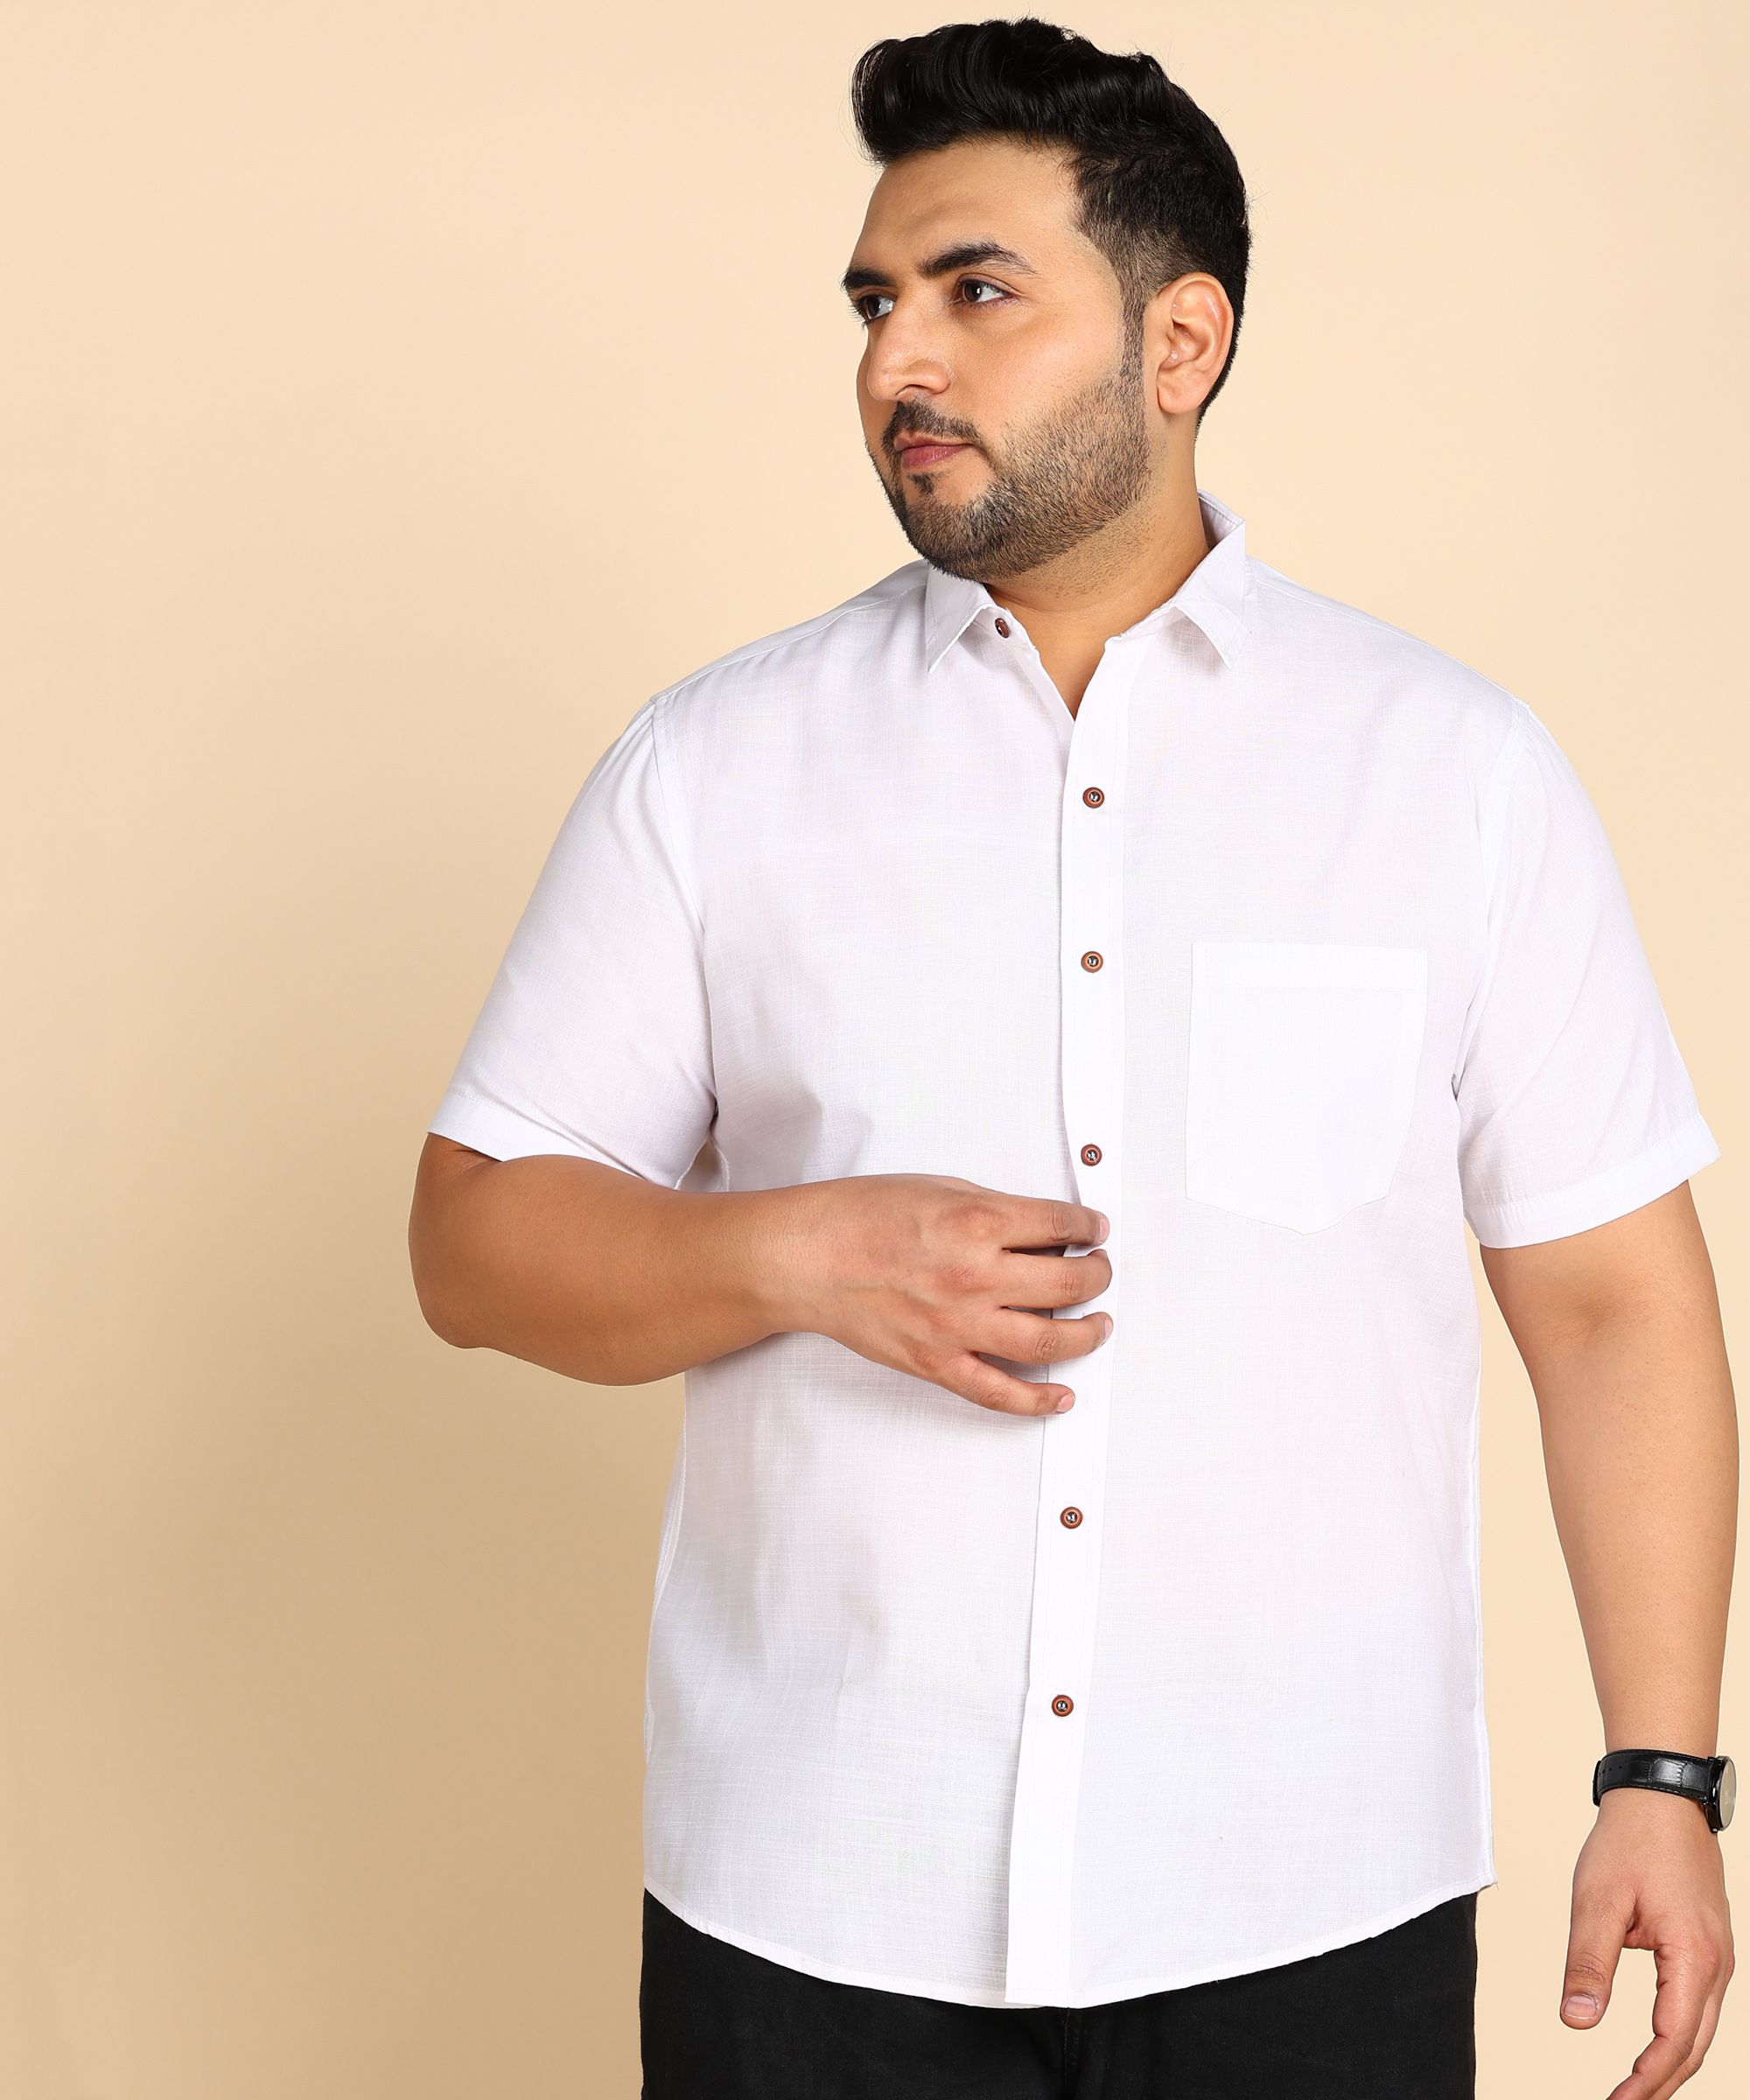     			PRINTCULTR Cotton Blend Regular Fit Solids Half Sleeves Men's Casual Shirt - White ( Pack of 1 )